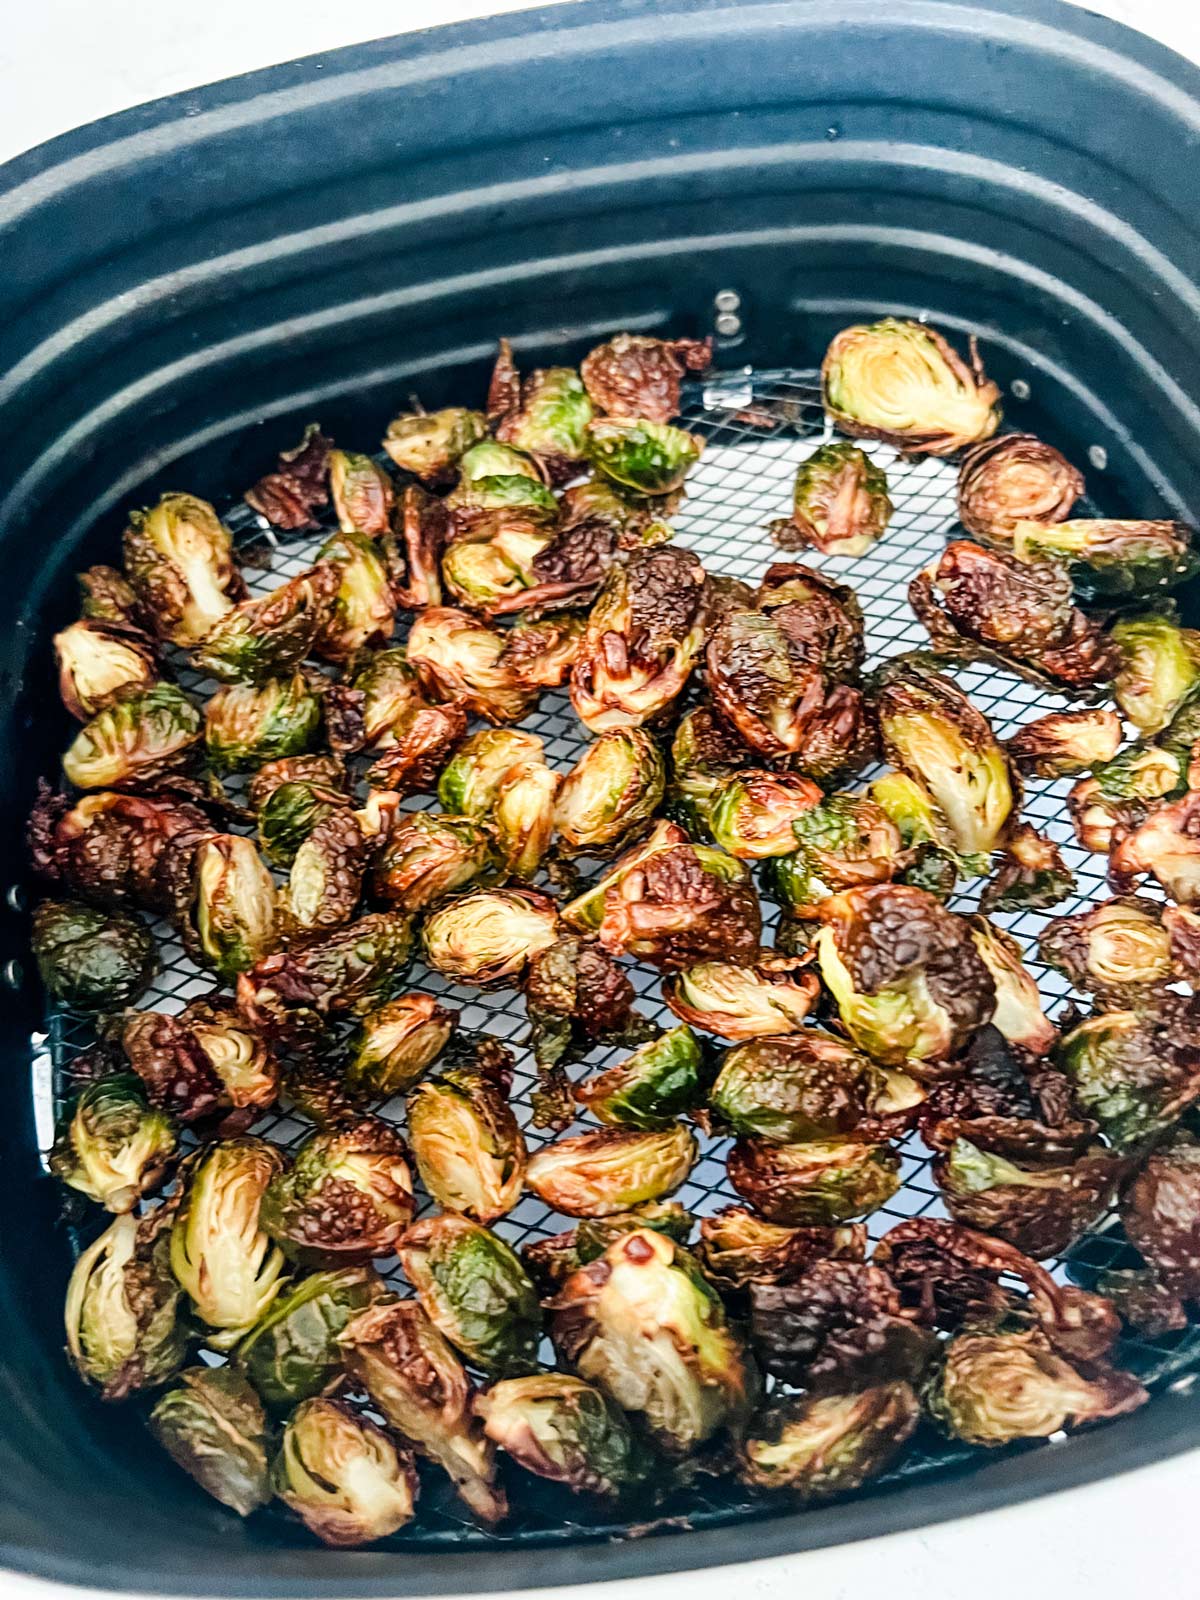 Crispy brussels sprouts in an air fryer basket.